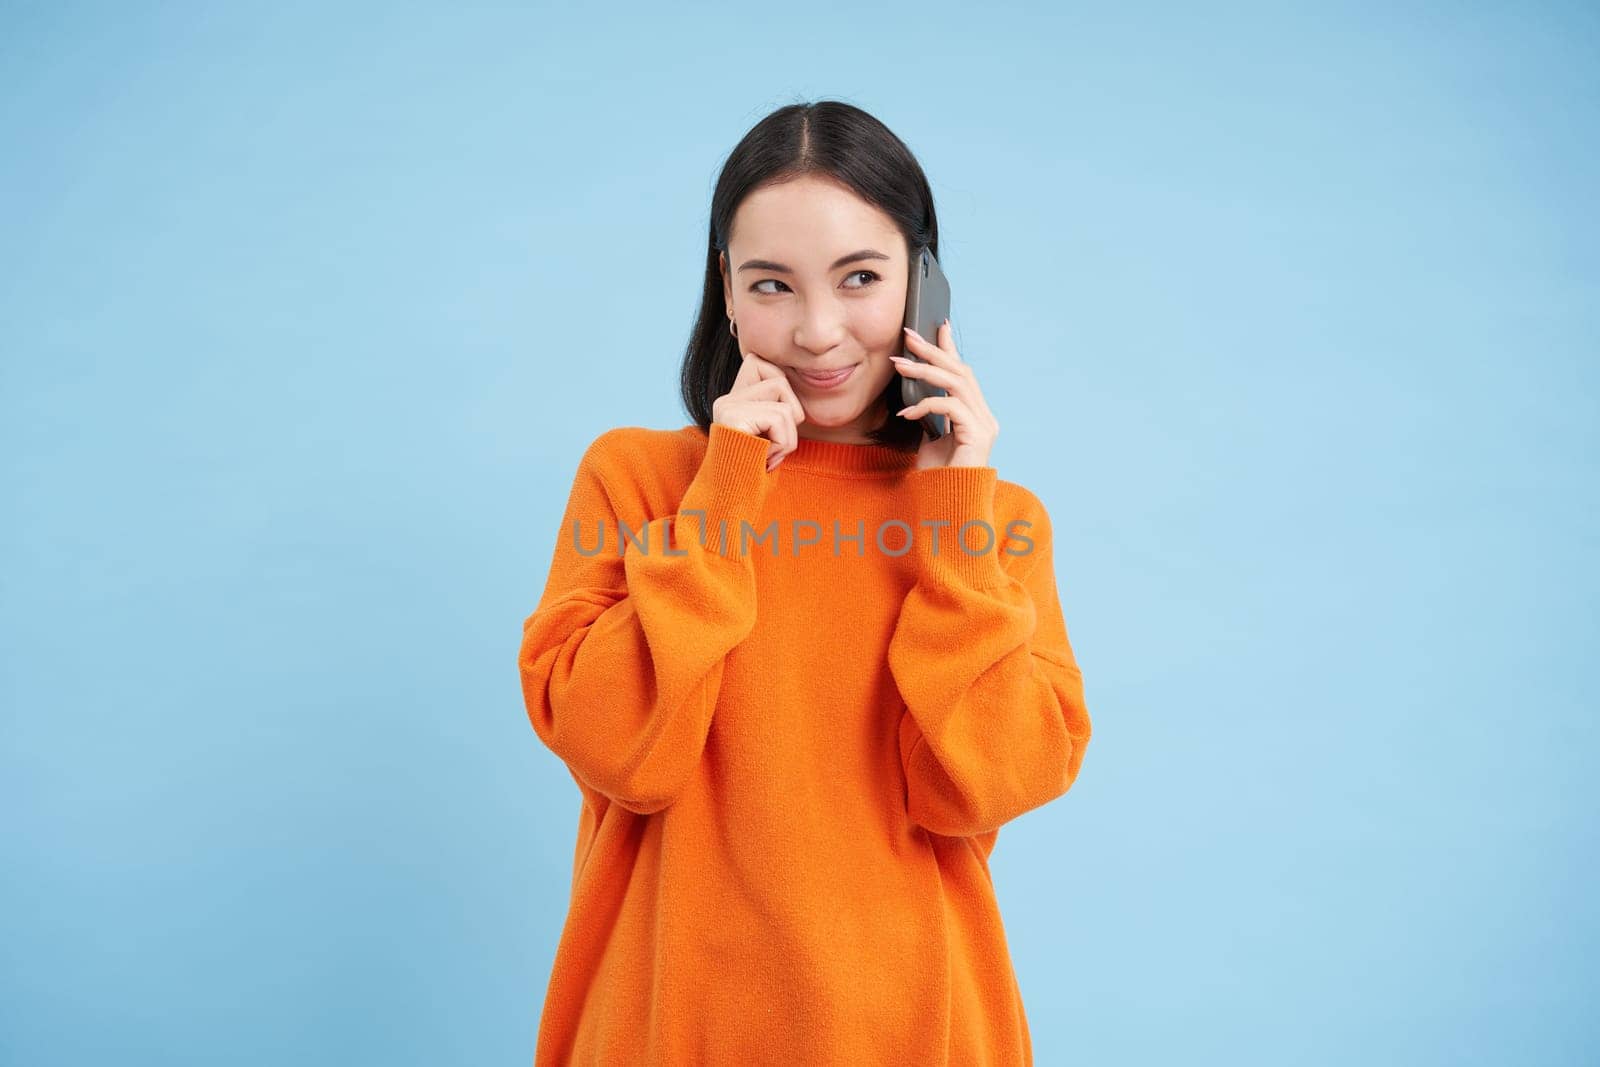 Portrait of young candid woman, asian girl talking on cellphone, holds mobile phone and speaks, stands over blue background.